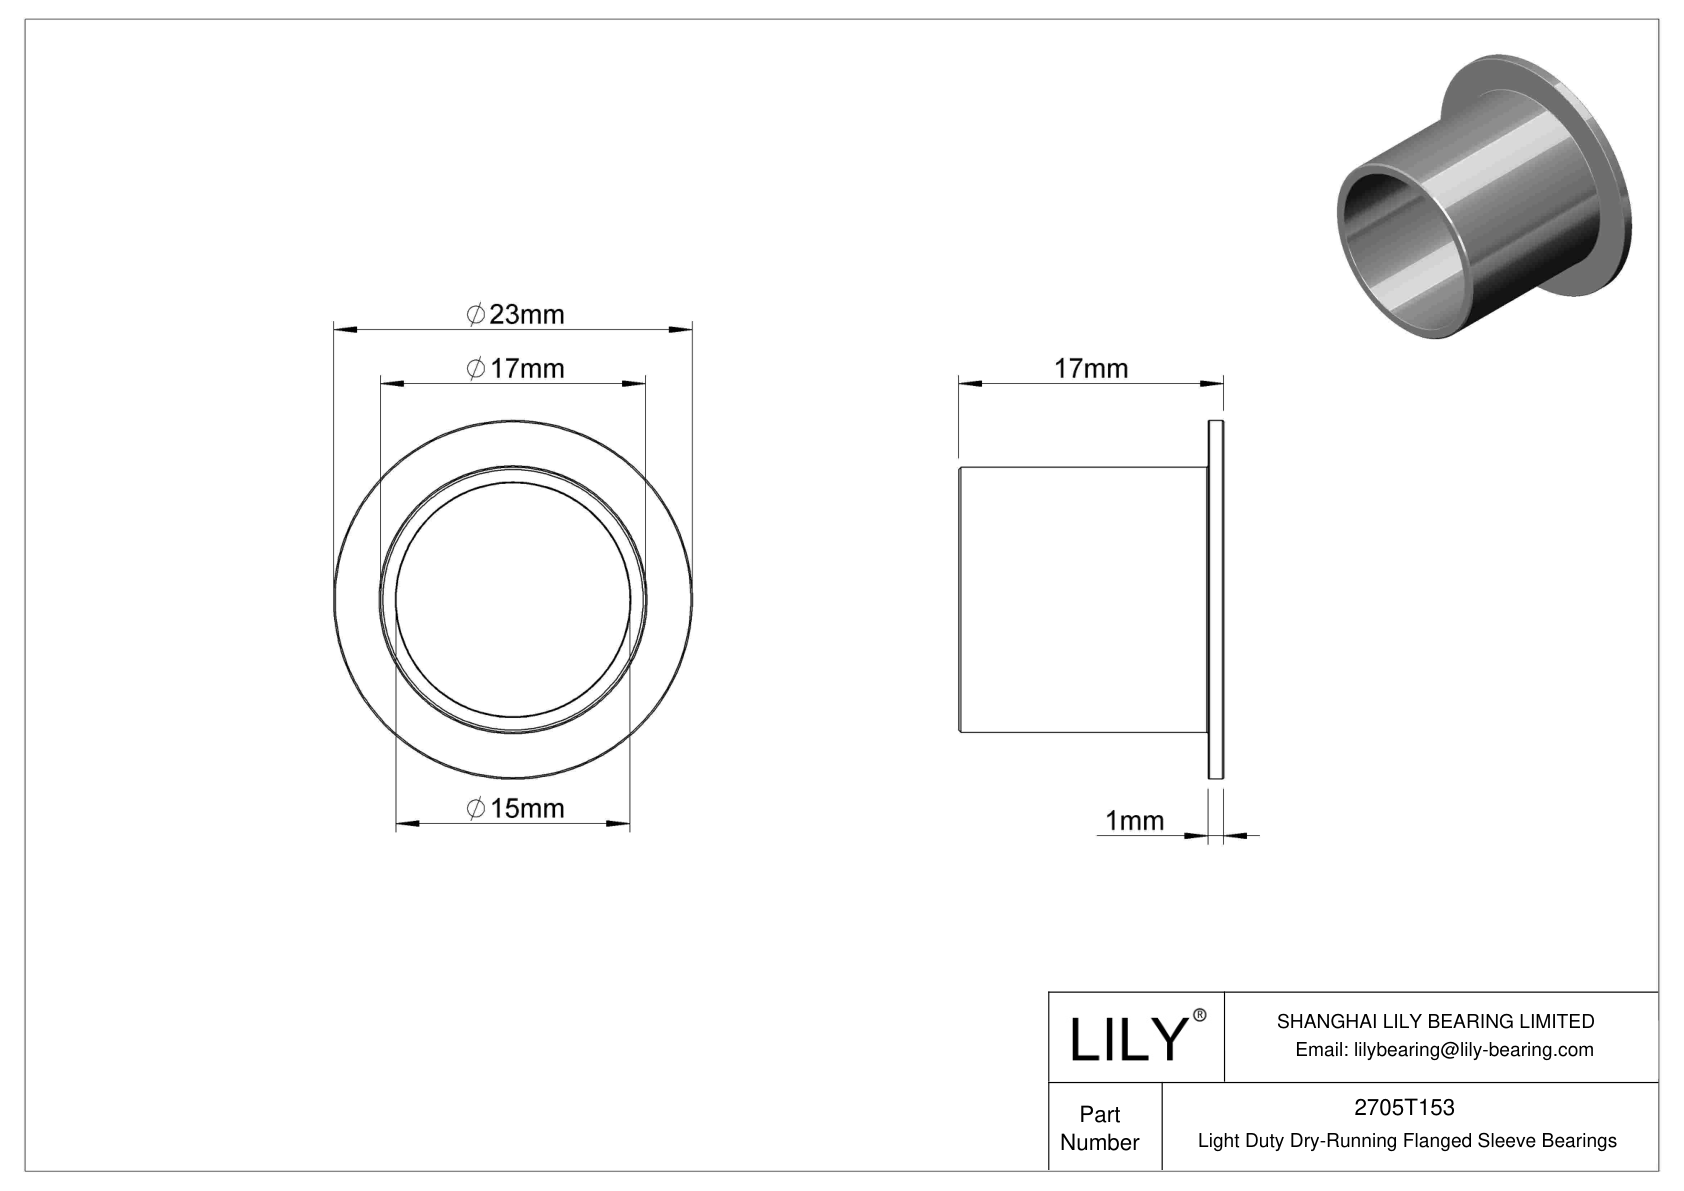 CHAFTBFD Light Duty Dry-Running Flanged Sleeve Bearings cad drawing